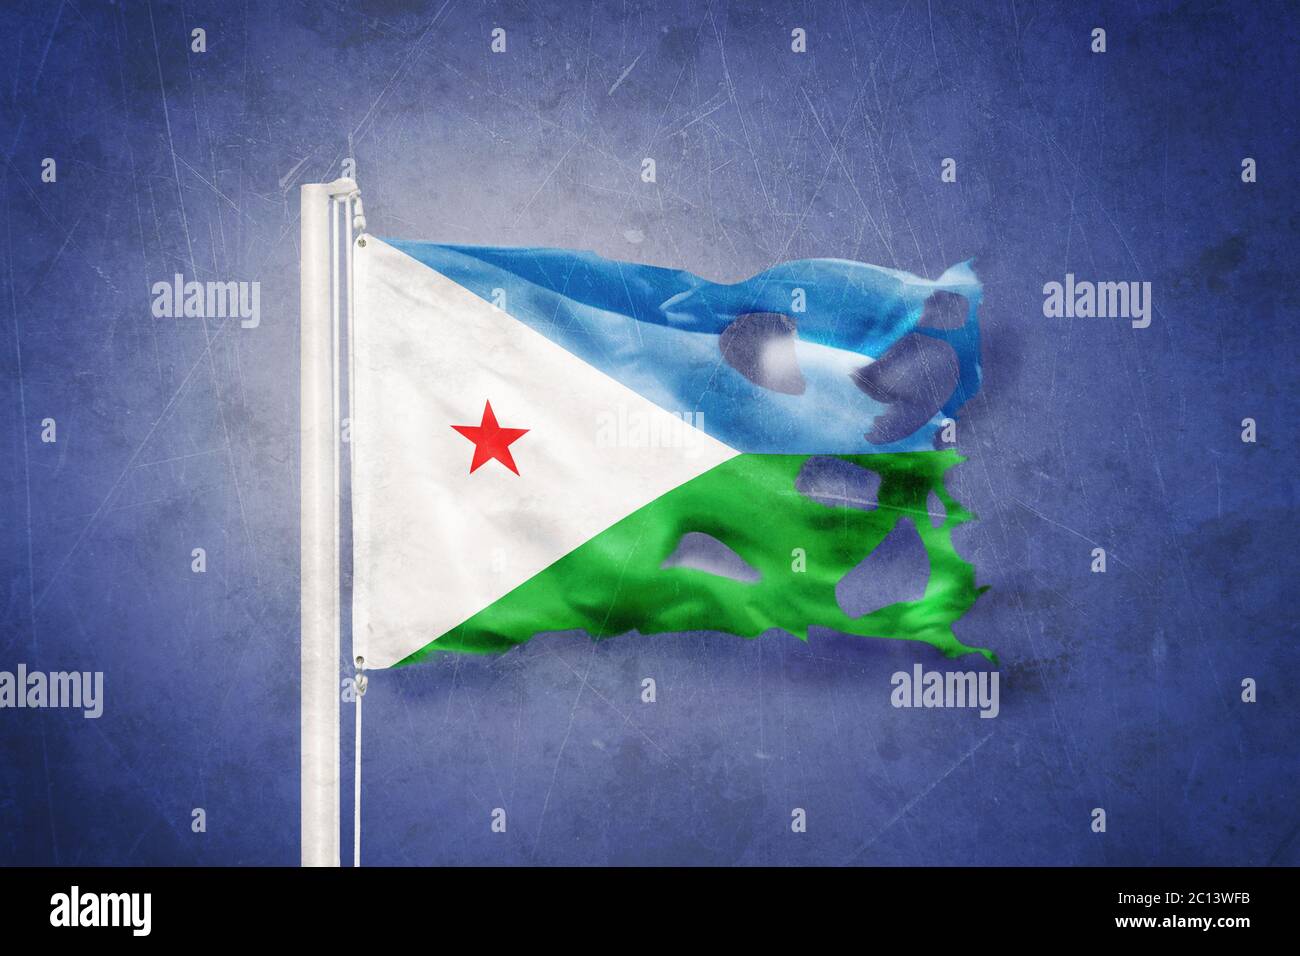 Torn flag of Djibouti flying against grunge background Stock Photo